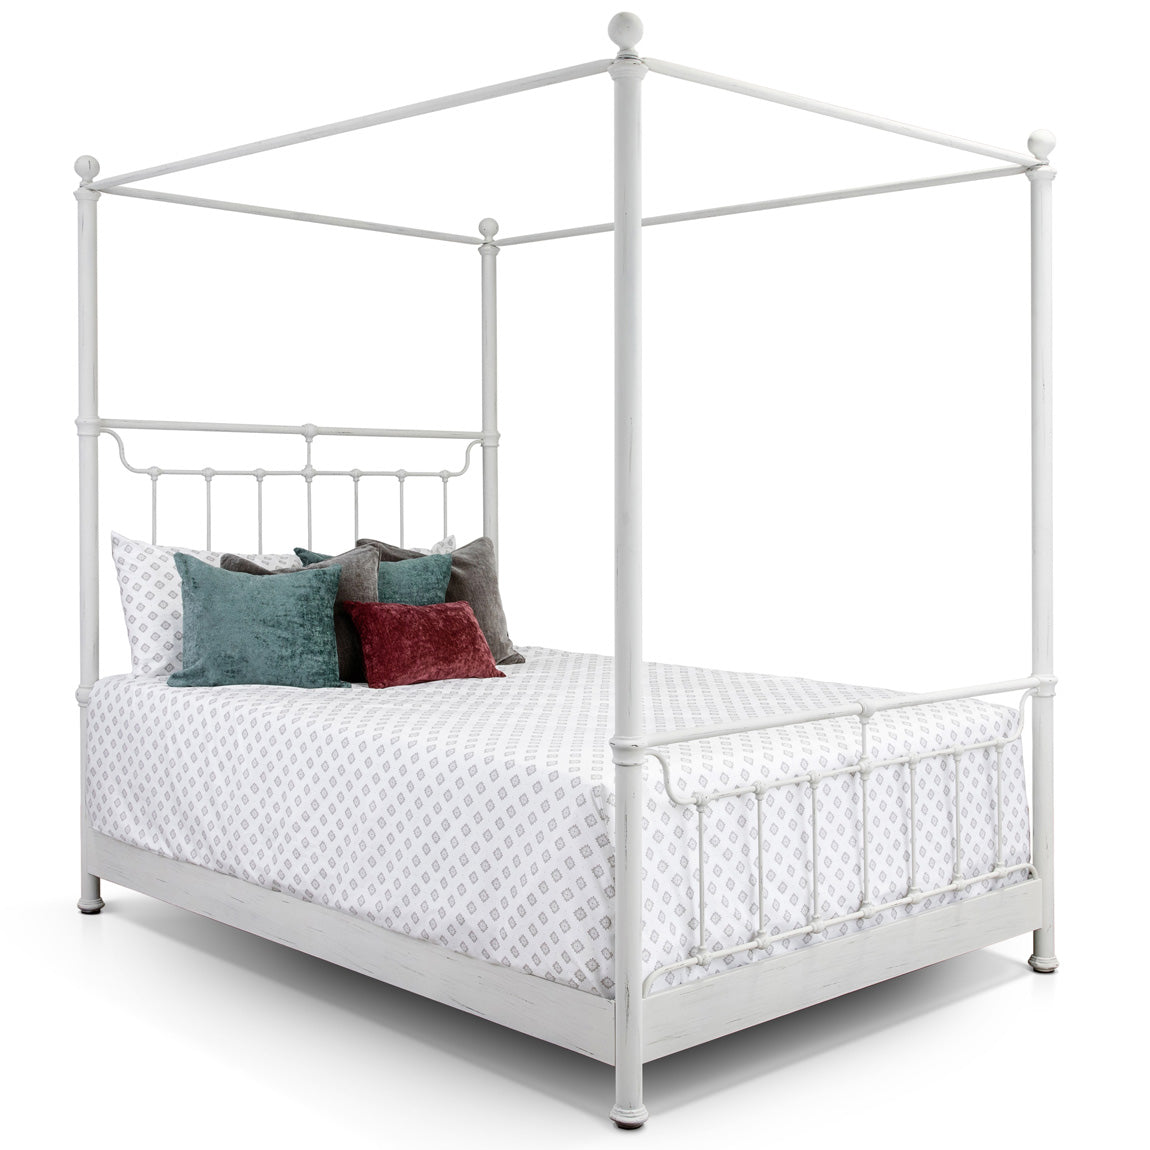 Tucker Iron Canopy Bed 1302 Wesley Allen Queen CBMPF Distressed White Finish Matriae